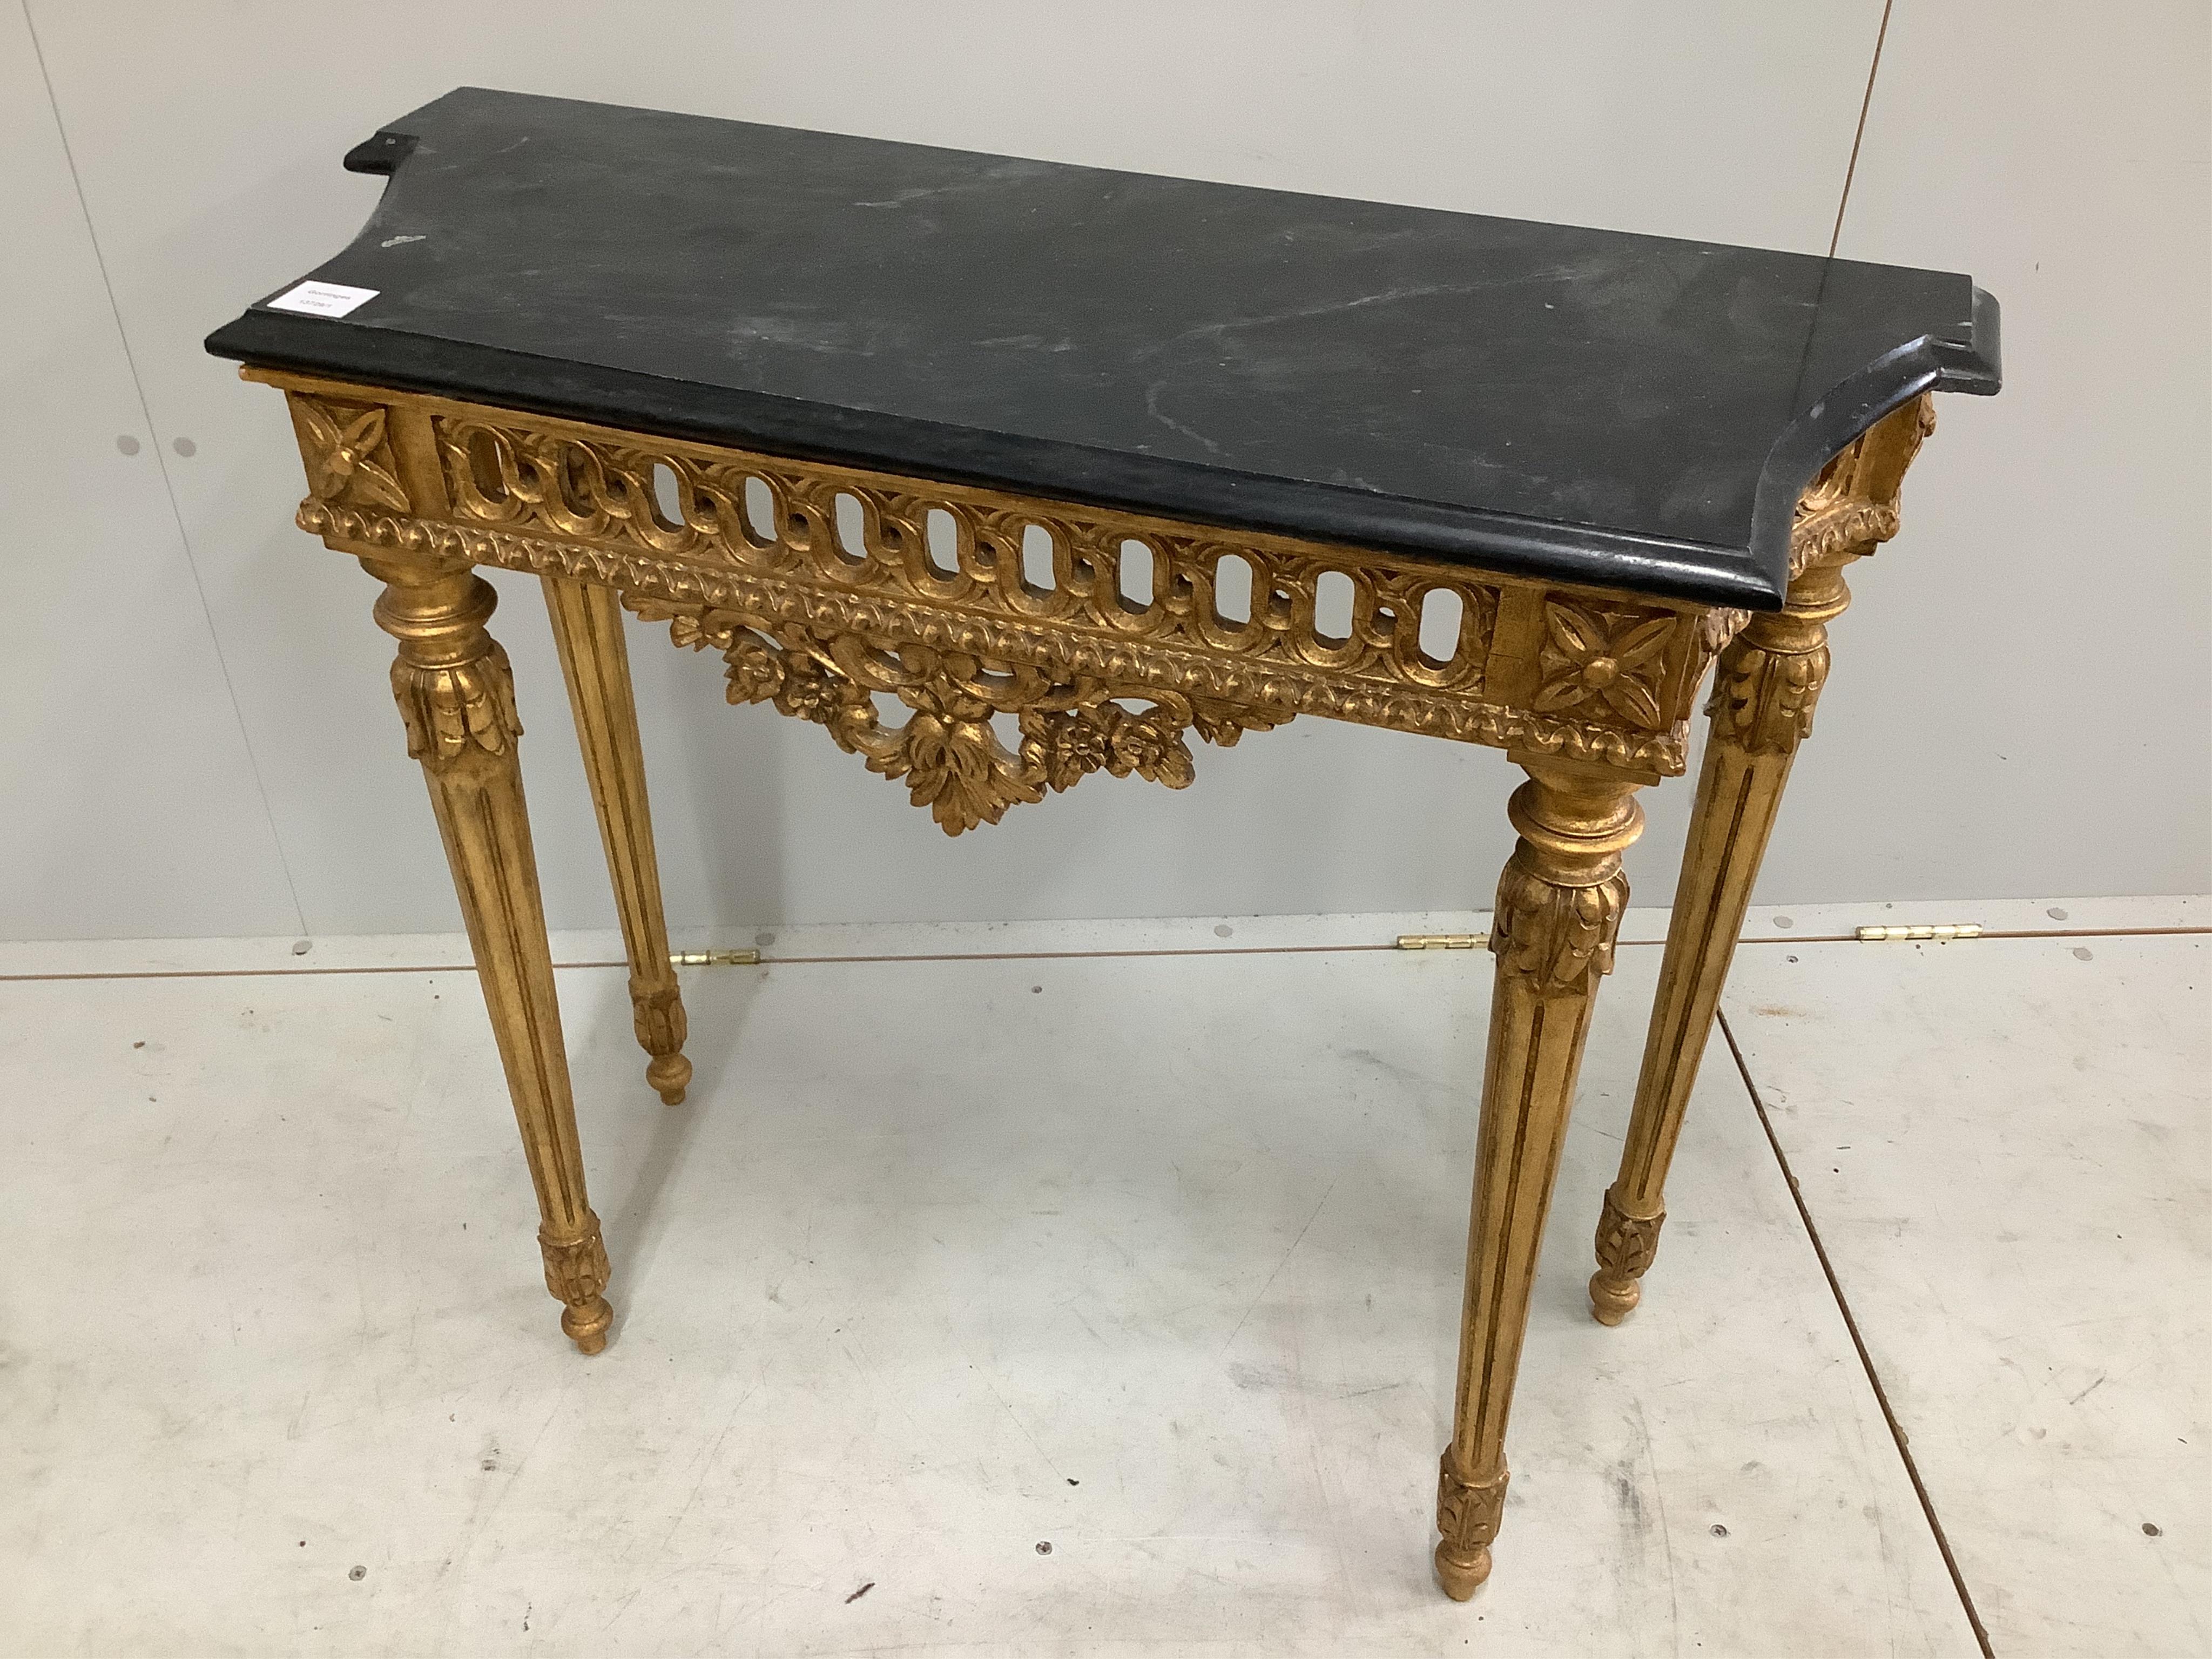 An 18th century style giltwood marble top console table, width 88cm, depth 33cm, height 78cm